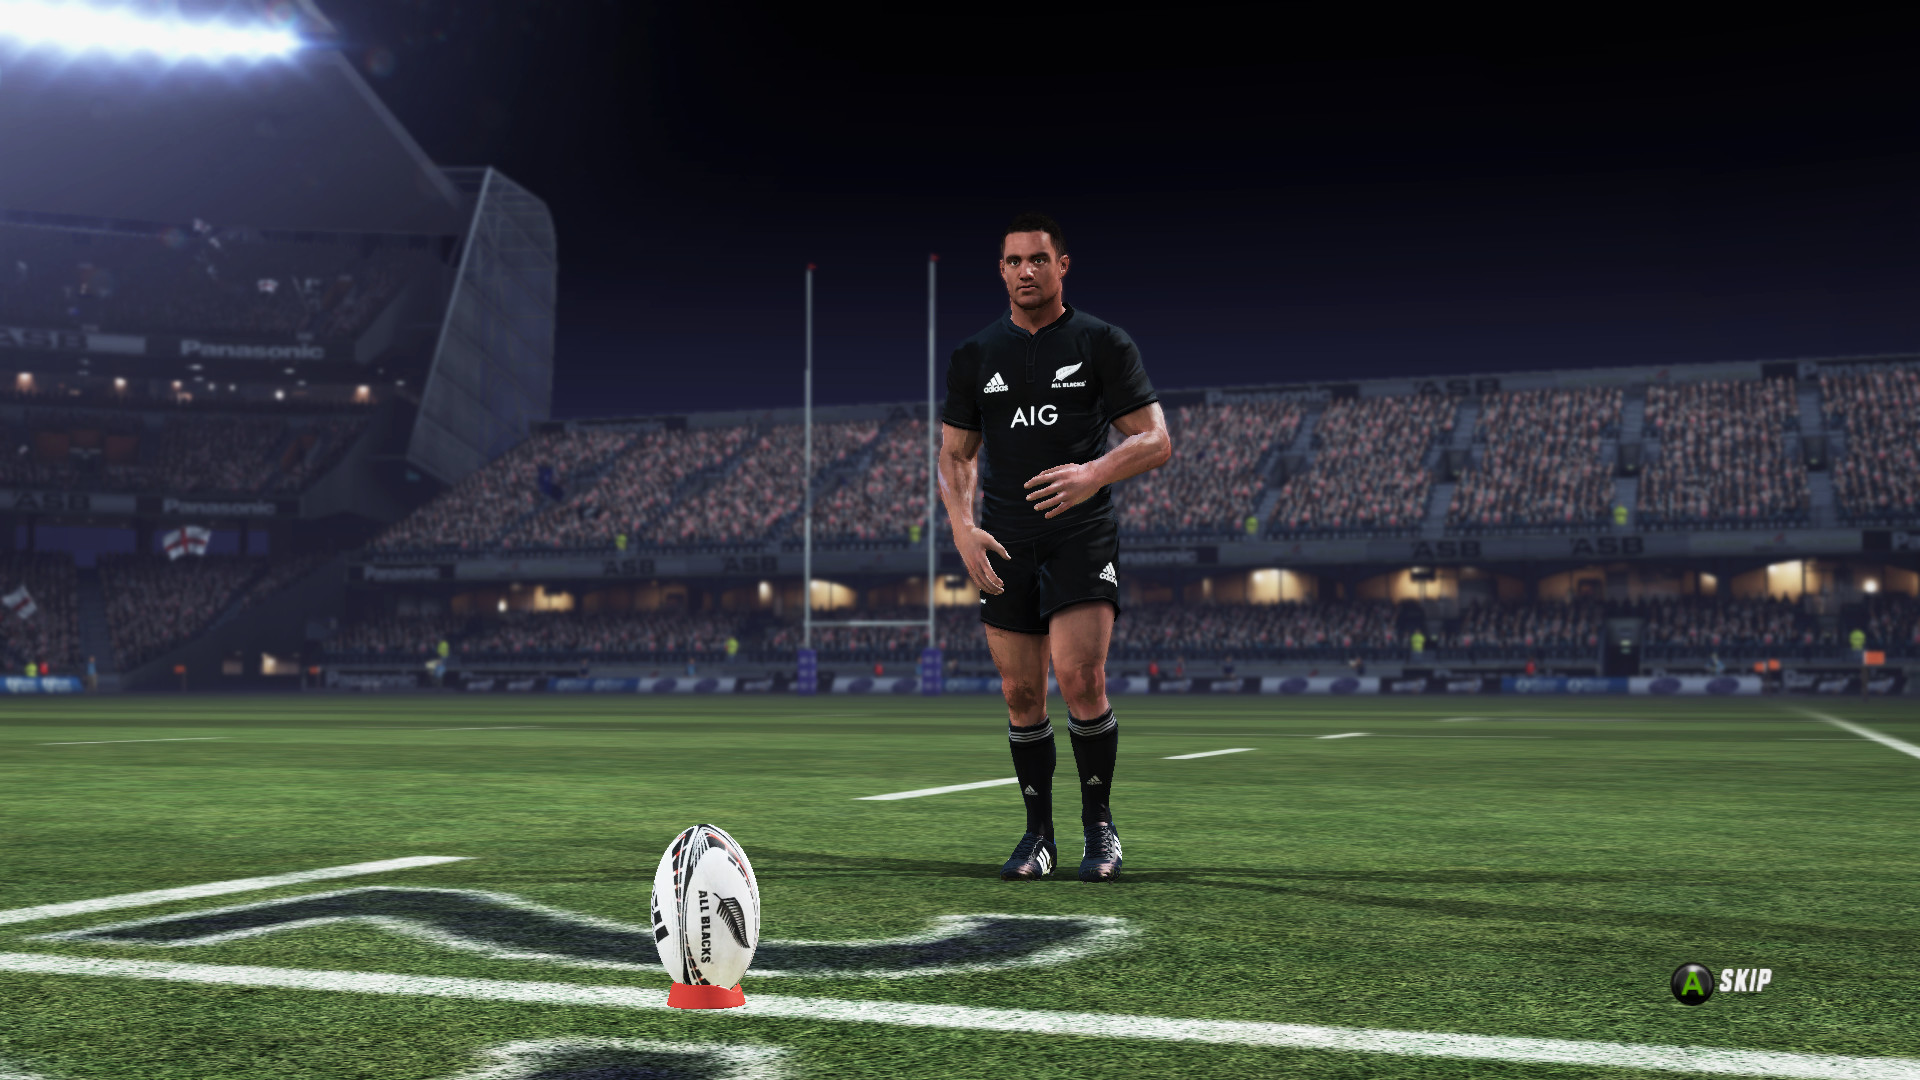 rugby challenge 3 ideal height and weight